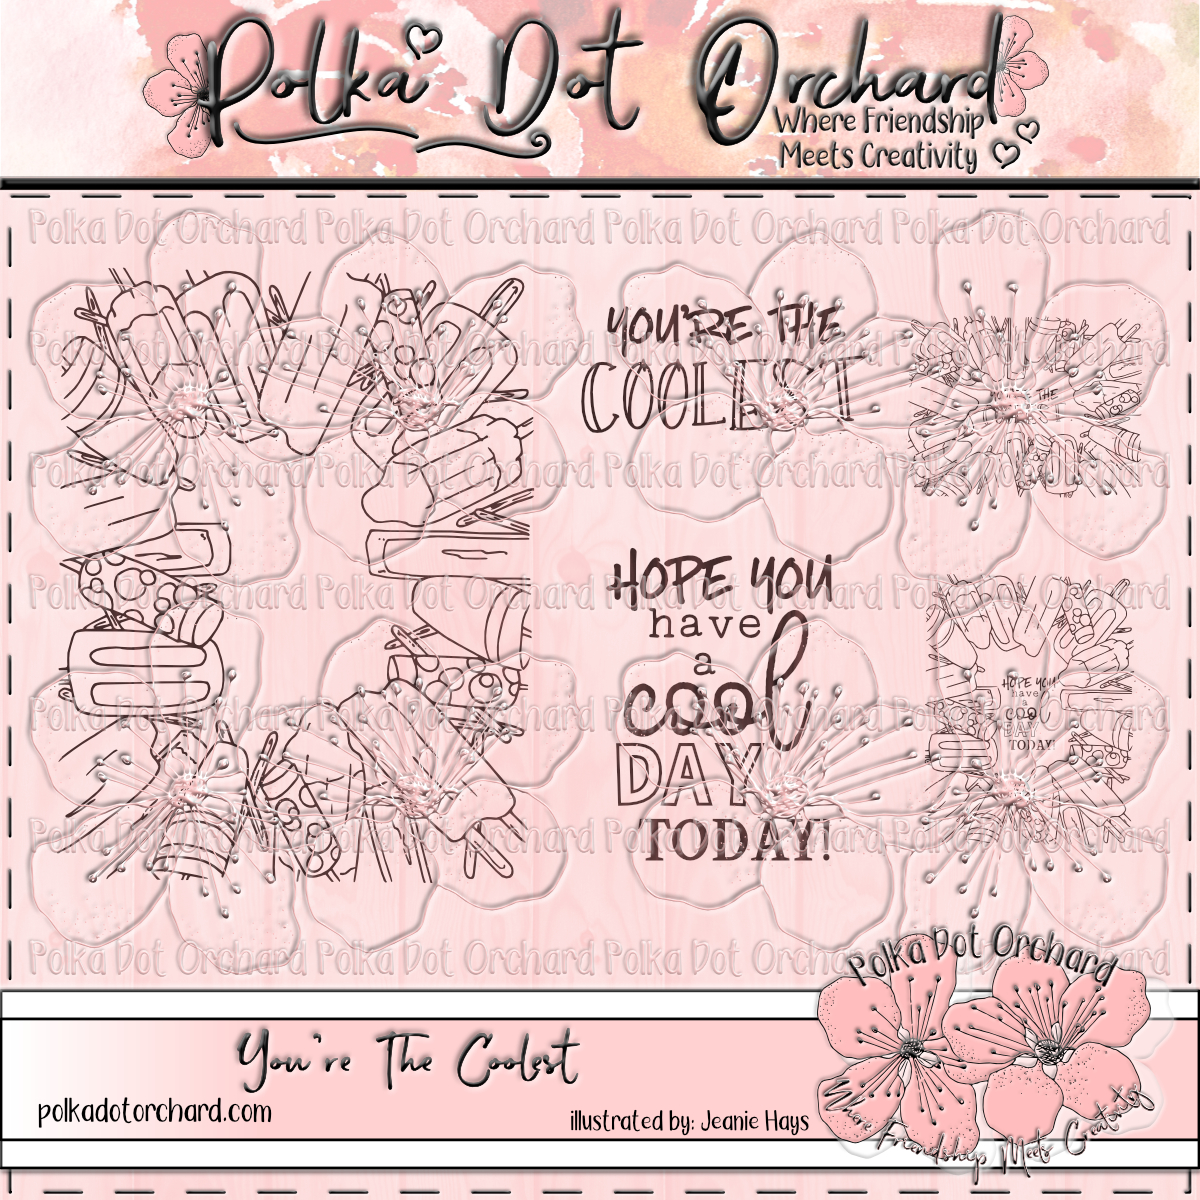 You’re The Coolest – Polka Dot Orchard